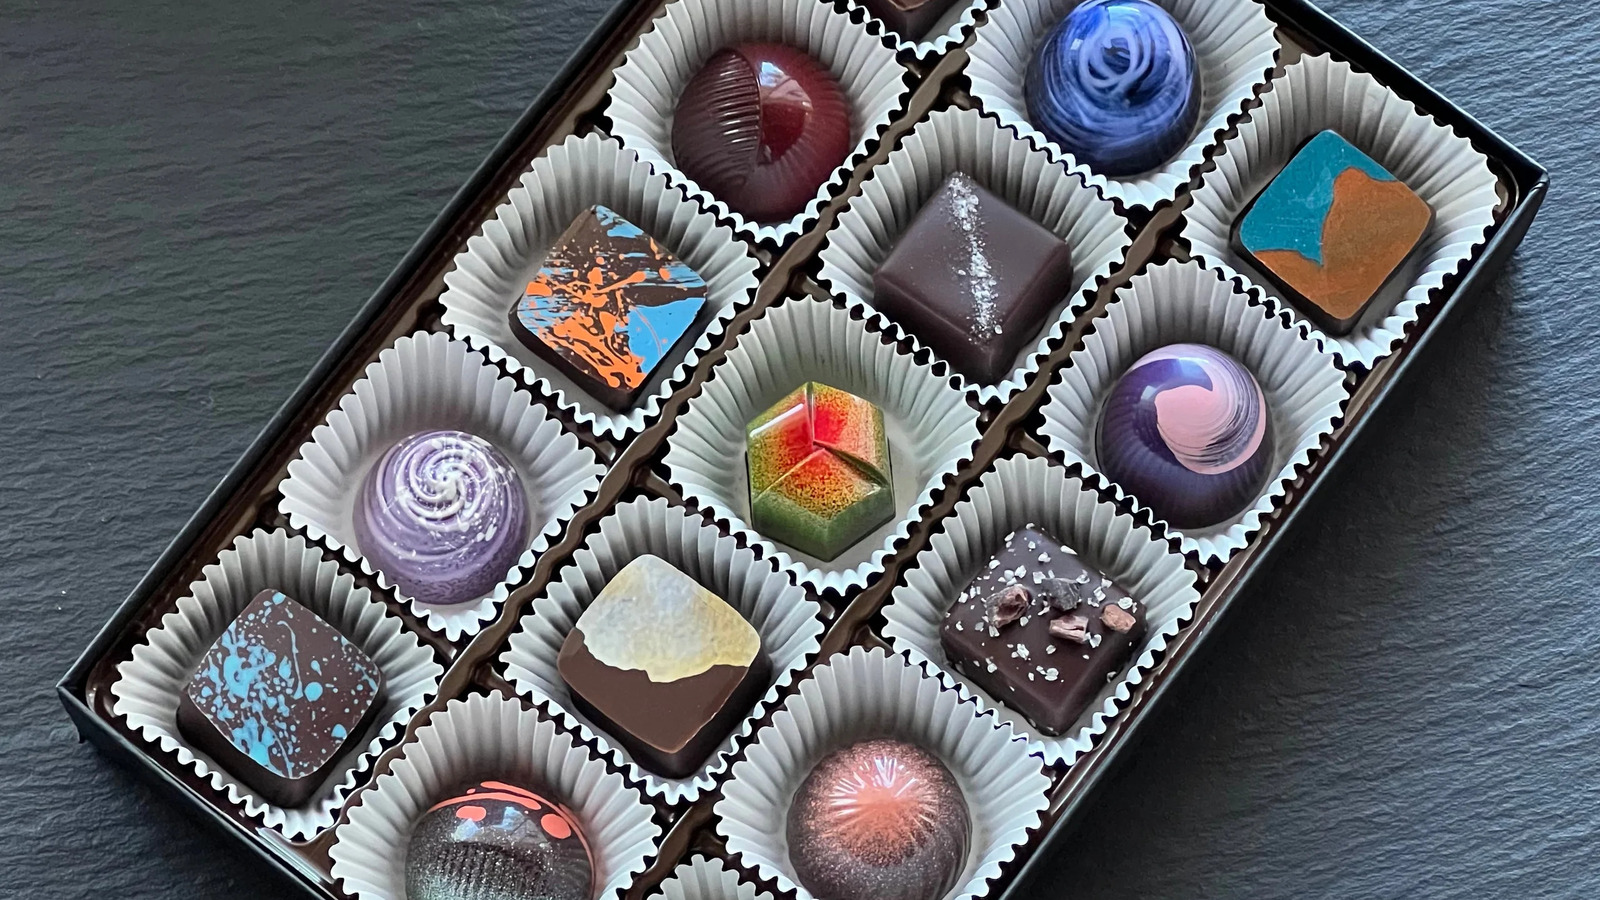 Ten Tasty Types of Chocolate to Give to Your Loved Ones This Christmas